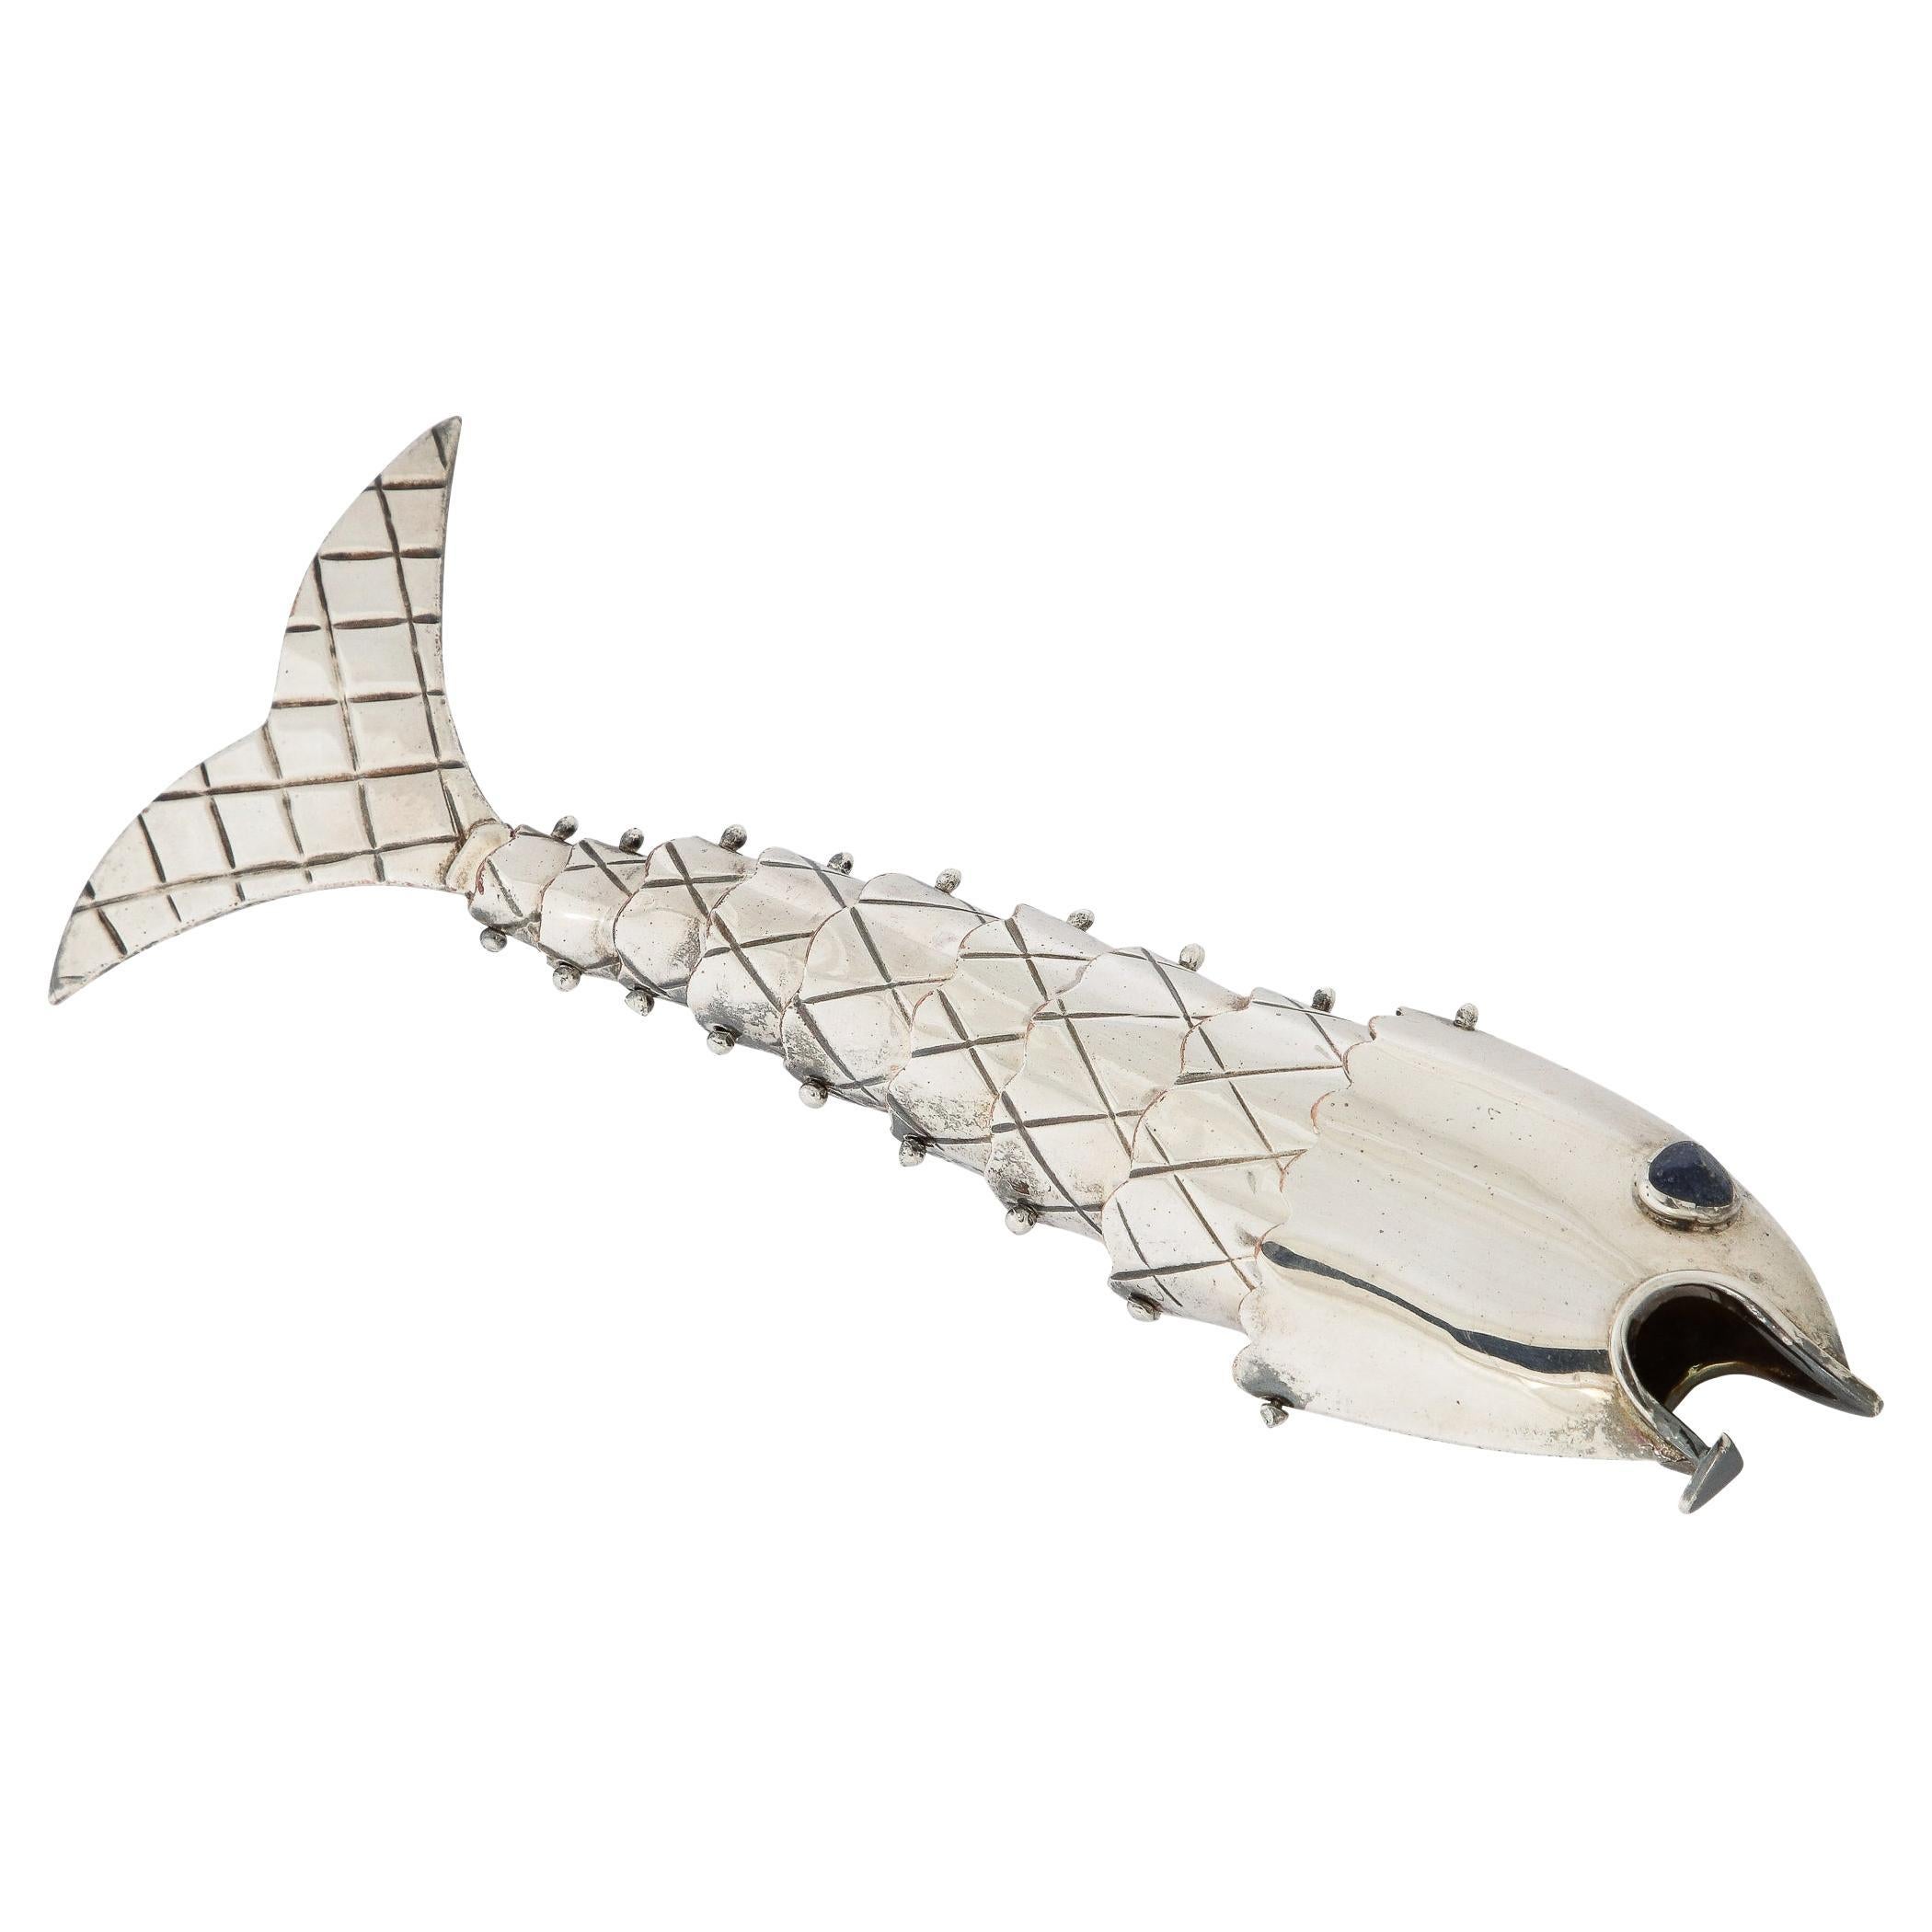 Modernist Hand Crafted Silver Plate Fish Bottle Opener by Emilia Castillo